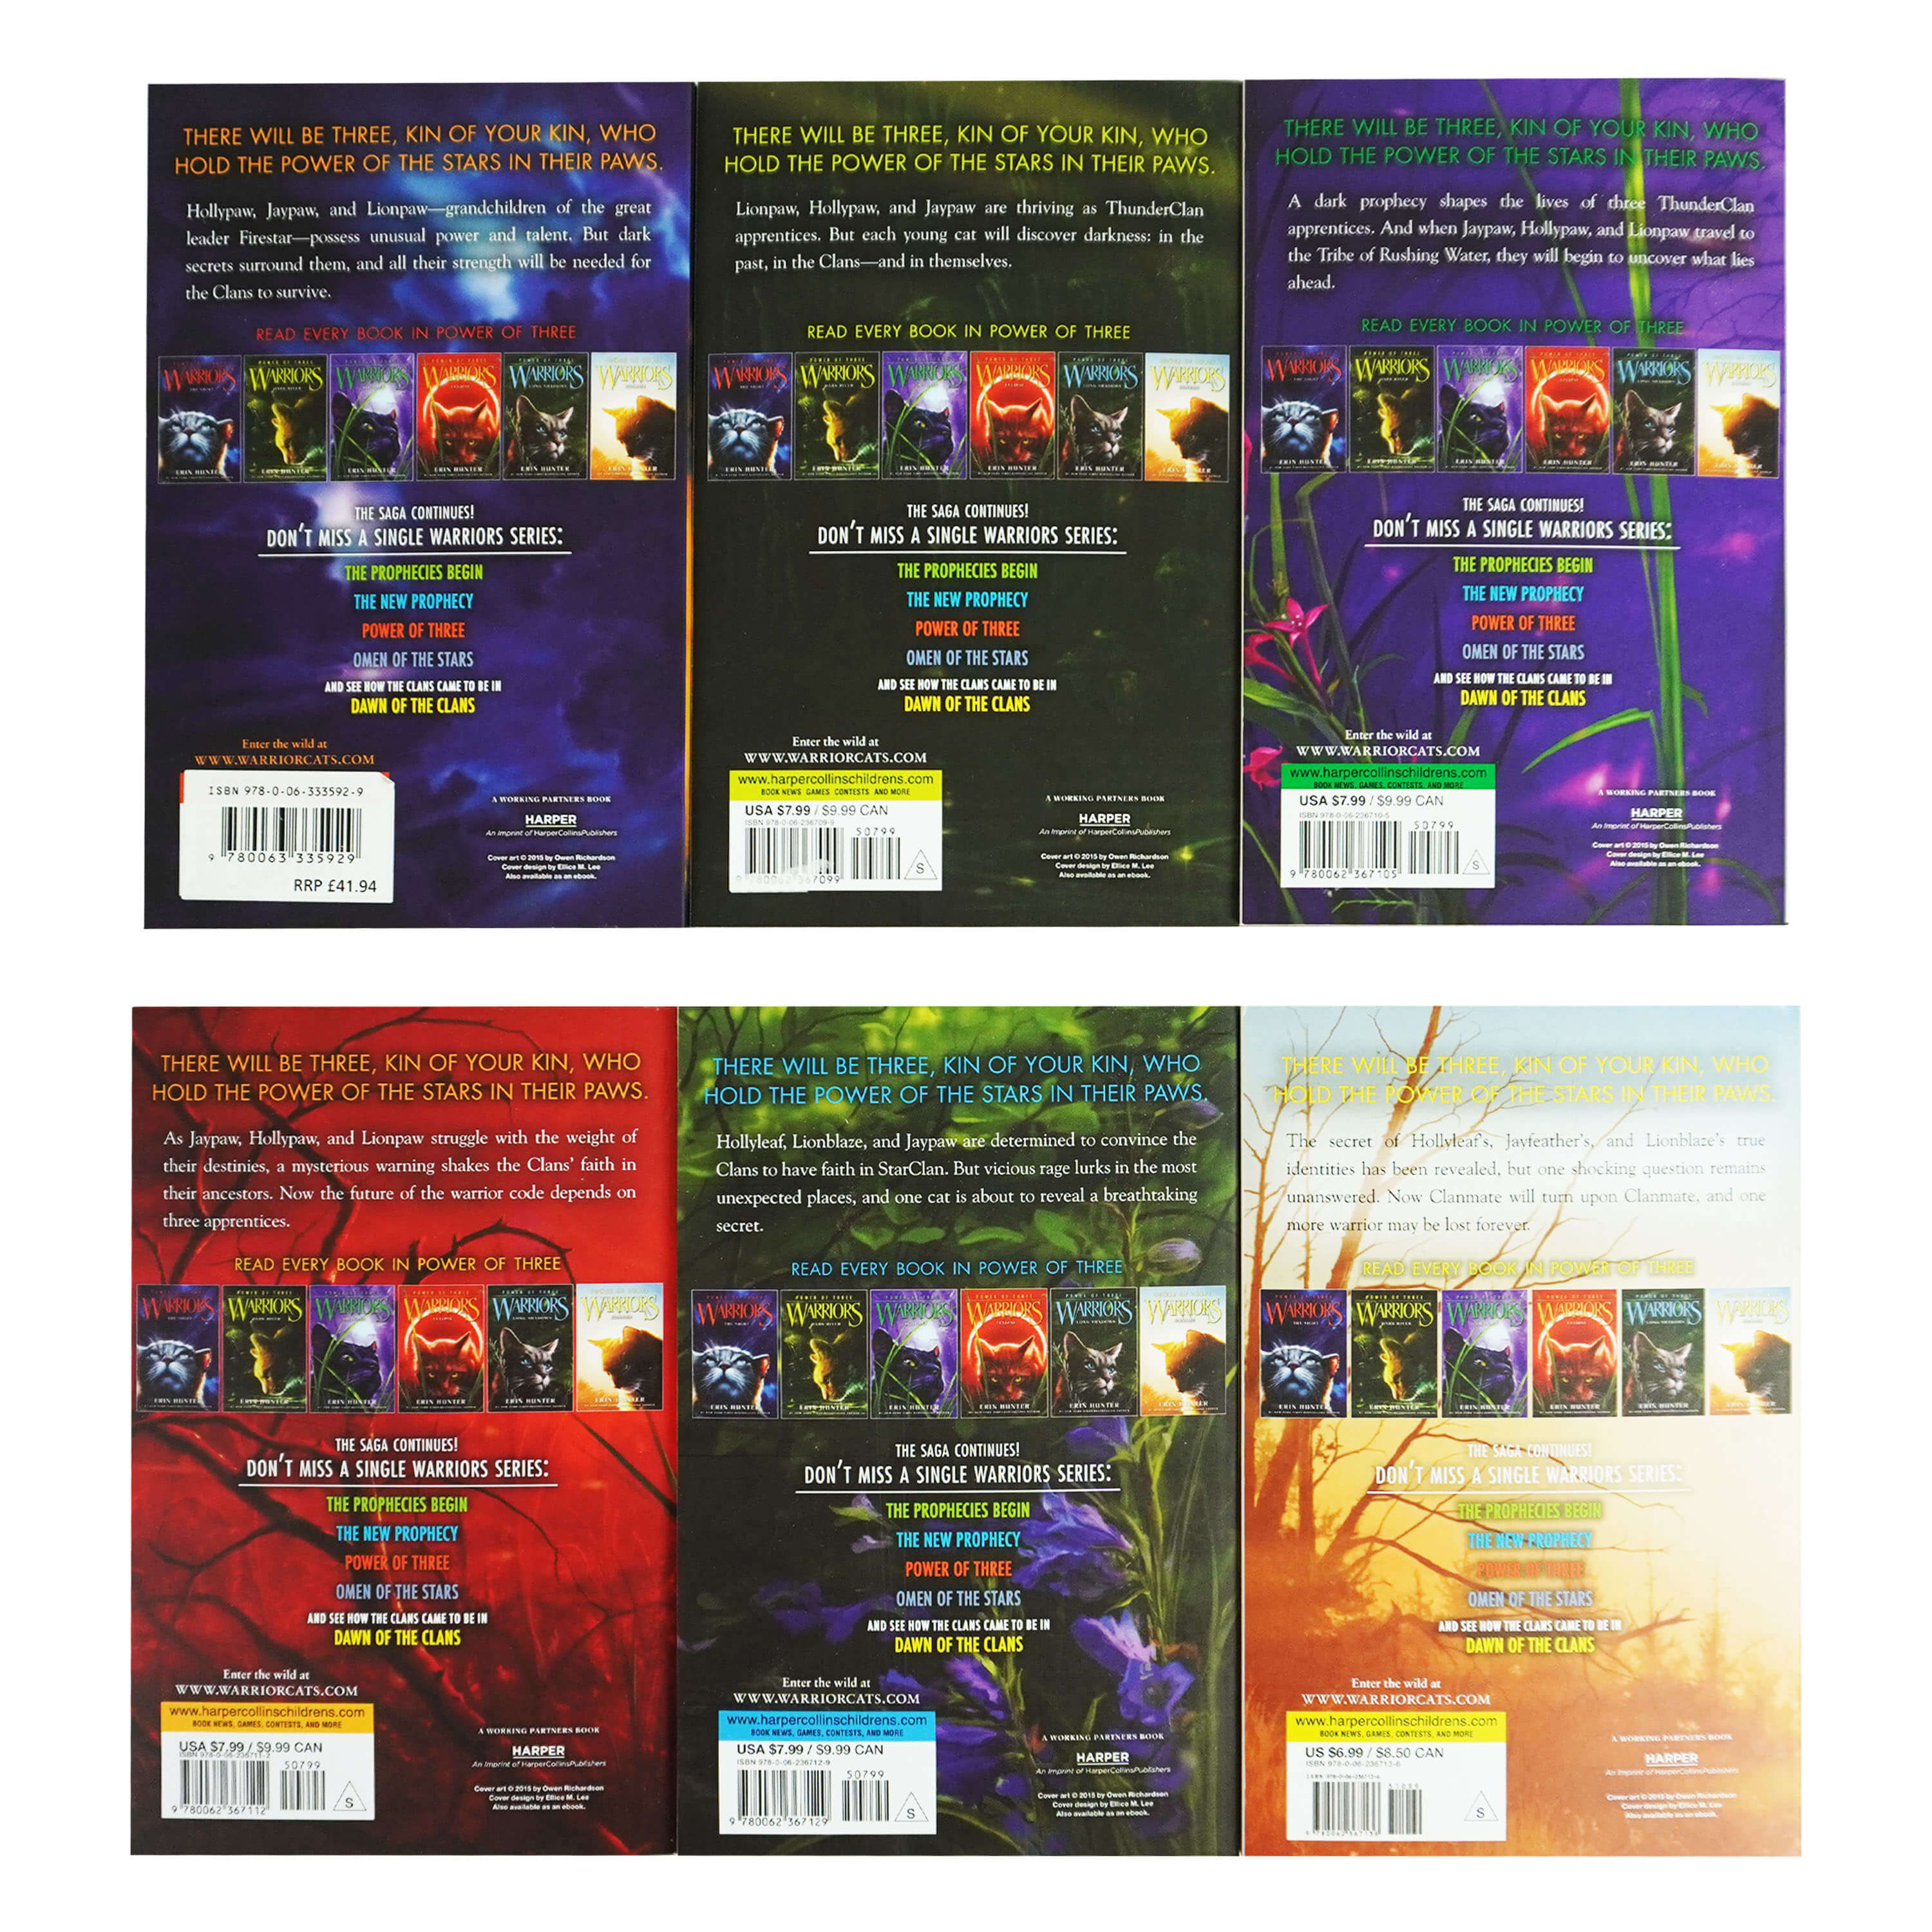 Warriors: Power of Three Collection by Erin Hunter 6 Books Collection Set - Ages 8-12 - Paperback